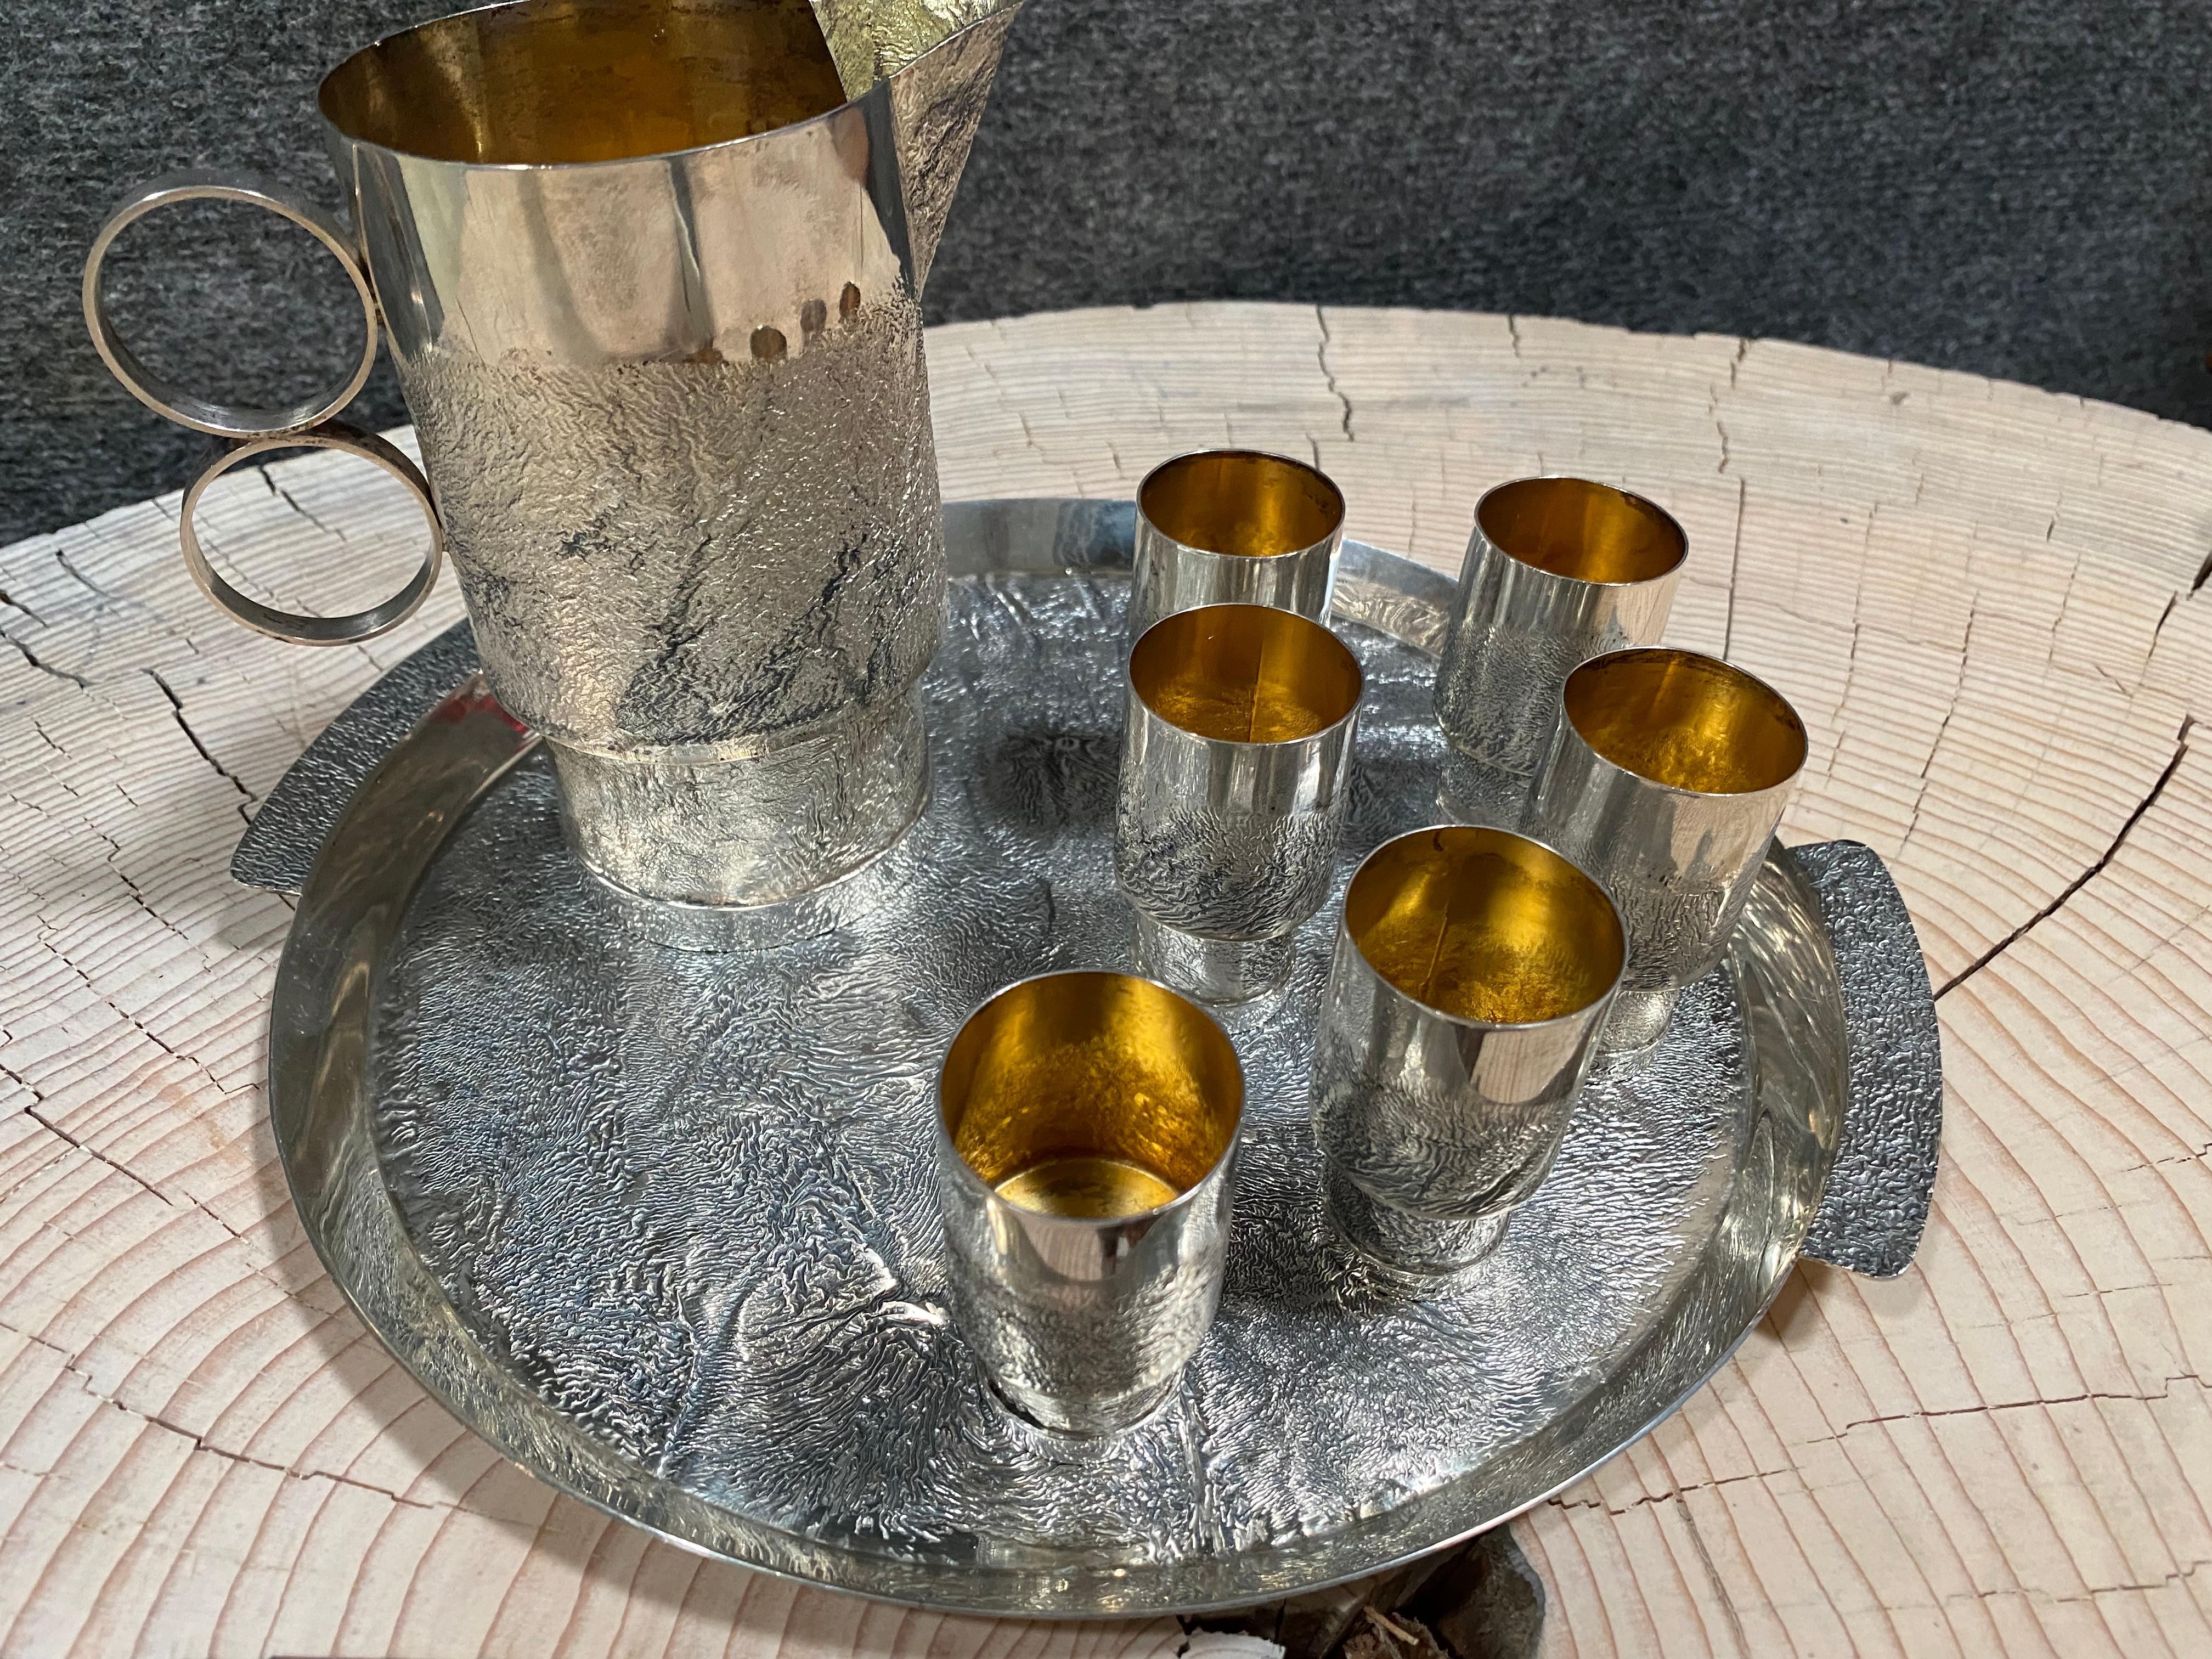 813 Silver Handmade Finland 1974-75 Pekka Turtiainen Design Vodka set.
Inside of the items are gilded.
Vintage Set of Silver 
A real eye-catcher, the center of the party. Cocktail set reflects the Finnish Ice and Wilderness spirit.
A wonderful